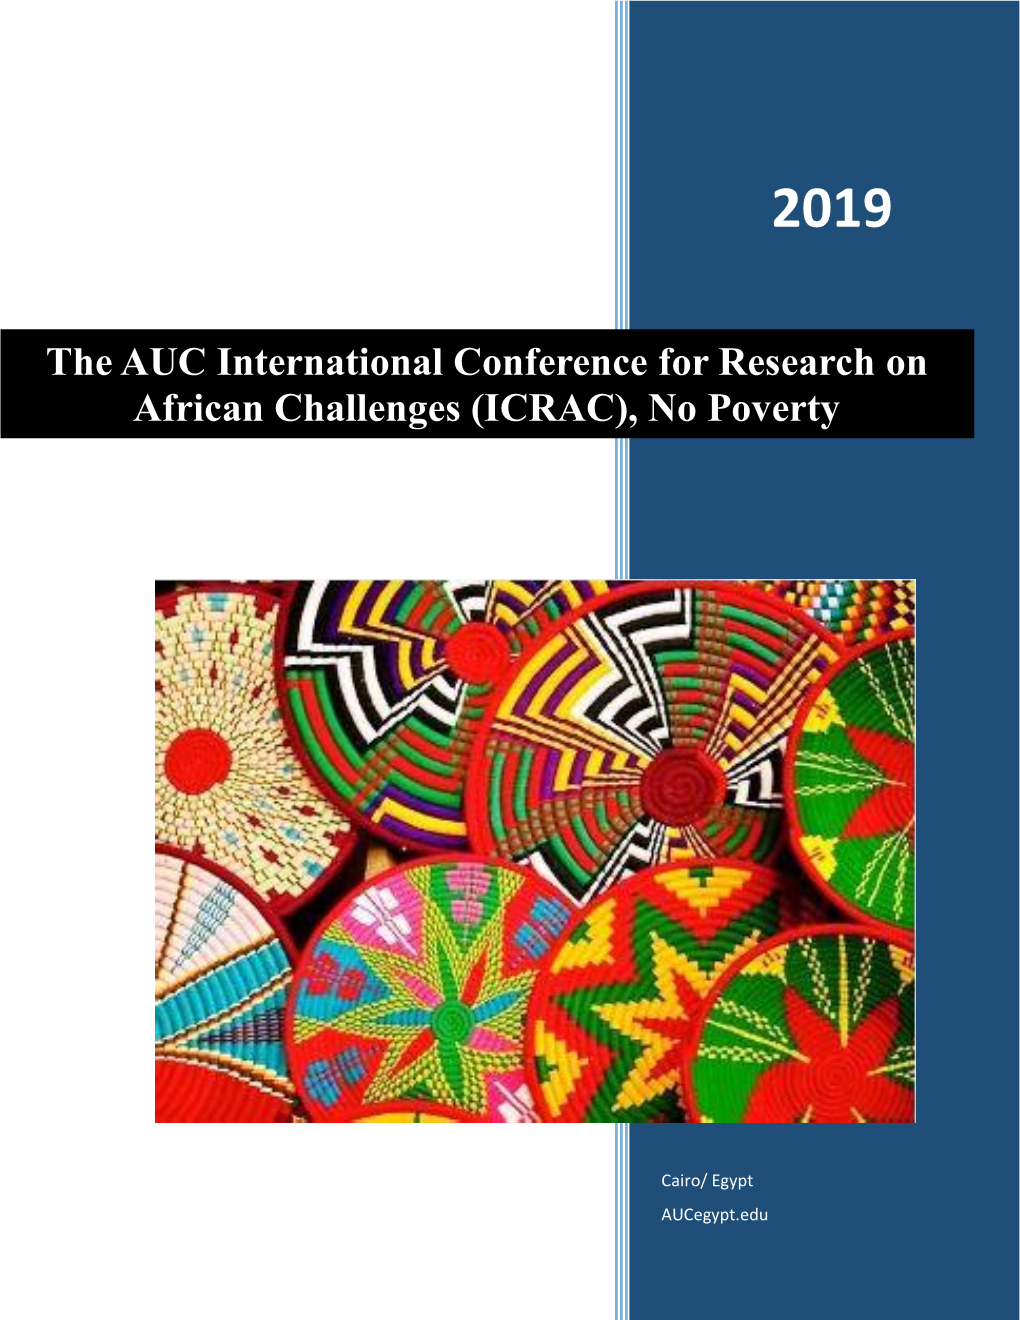 The AUC International Conference for Research on African Challenges (ICRAC), No Poverty